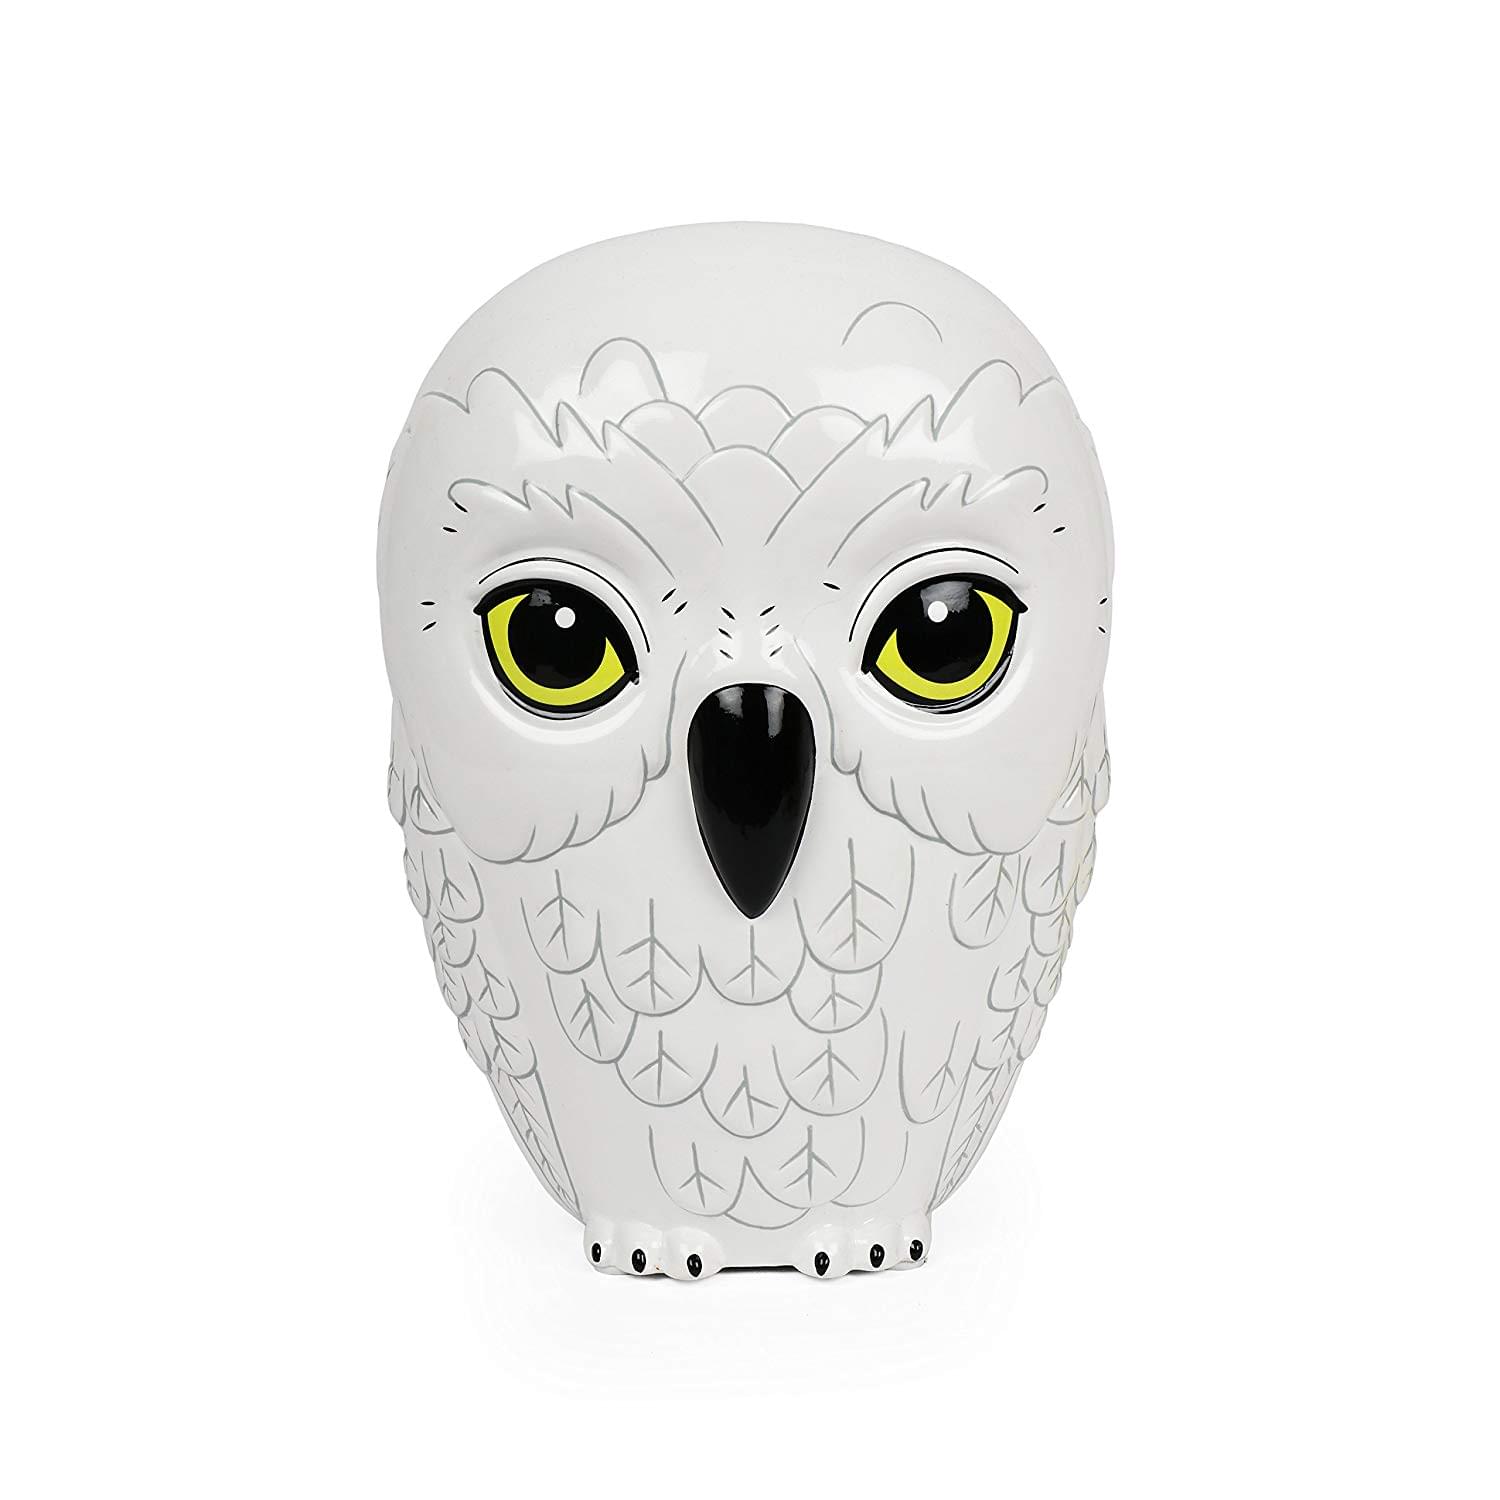 Harry Potter Hedwig The Owl Ceramic Coin Bank